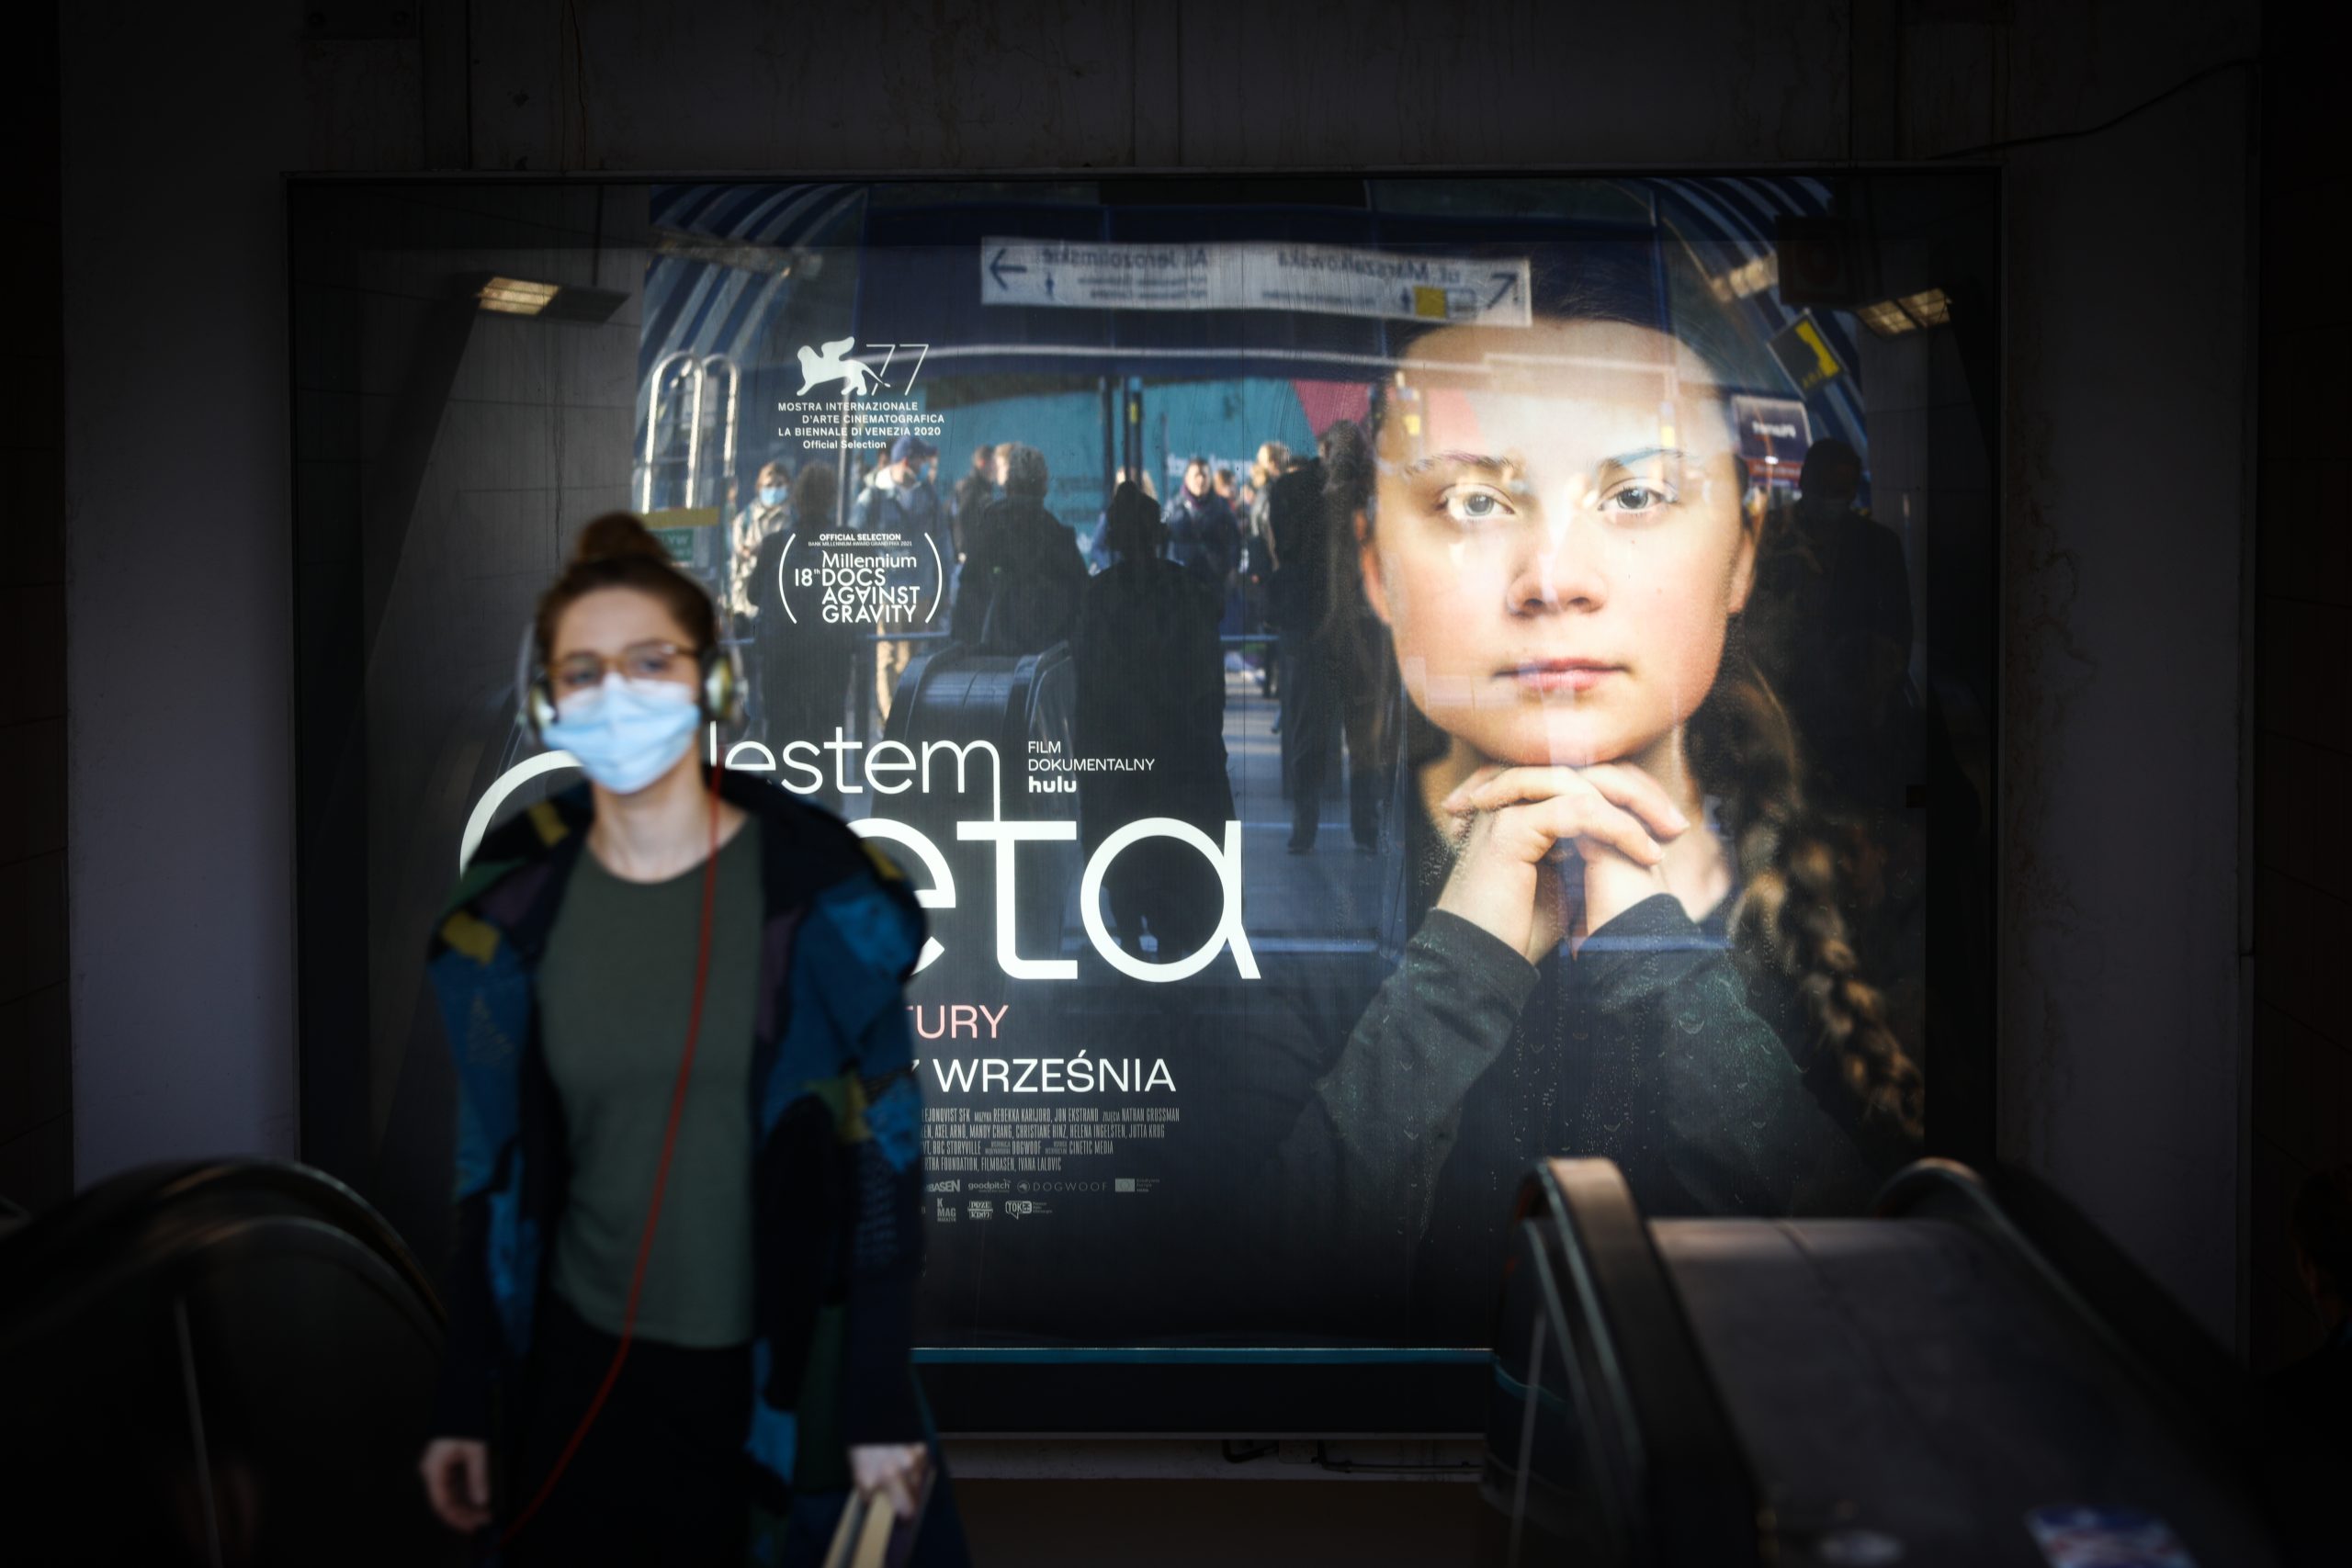 Photo: An advertisement for a new documentary on climate activist Greta Thunberg is seen at the Metro Centrum subway station in Warsaw, Poland on 01 October, 2021. Credit: STR/NurPhoto